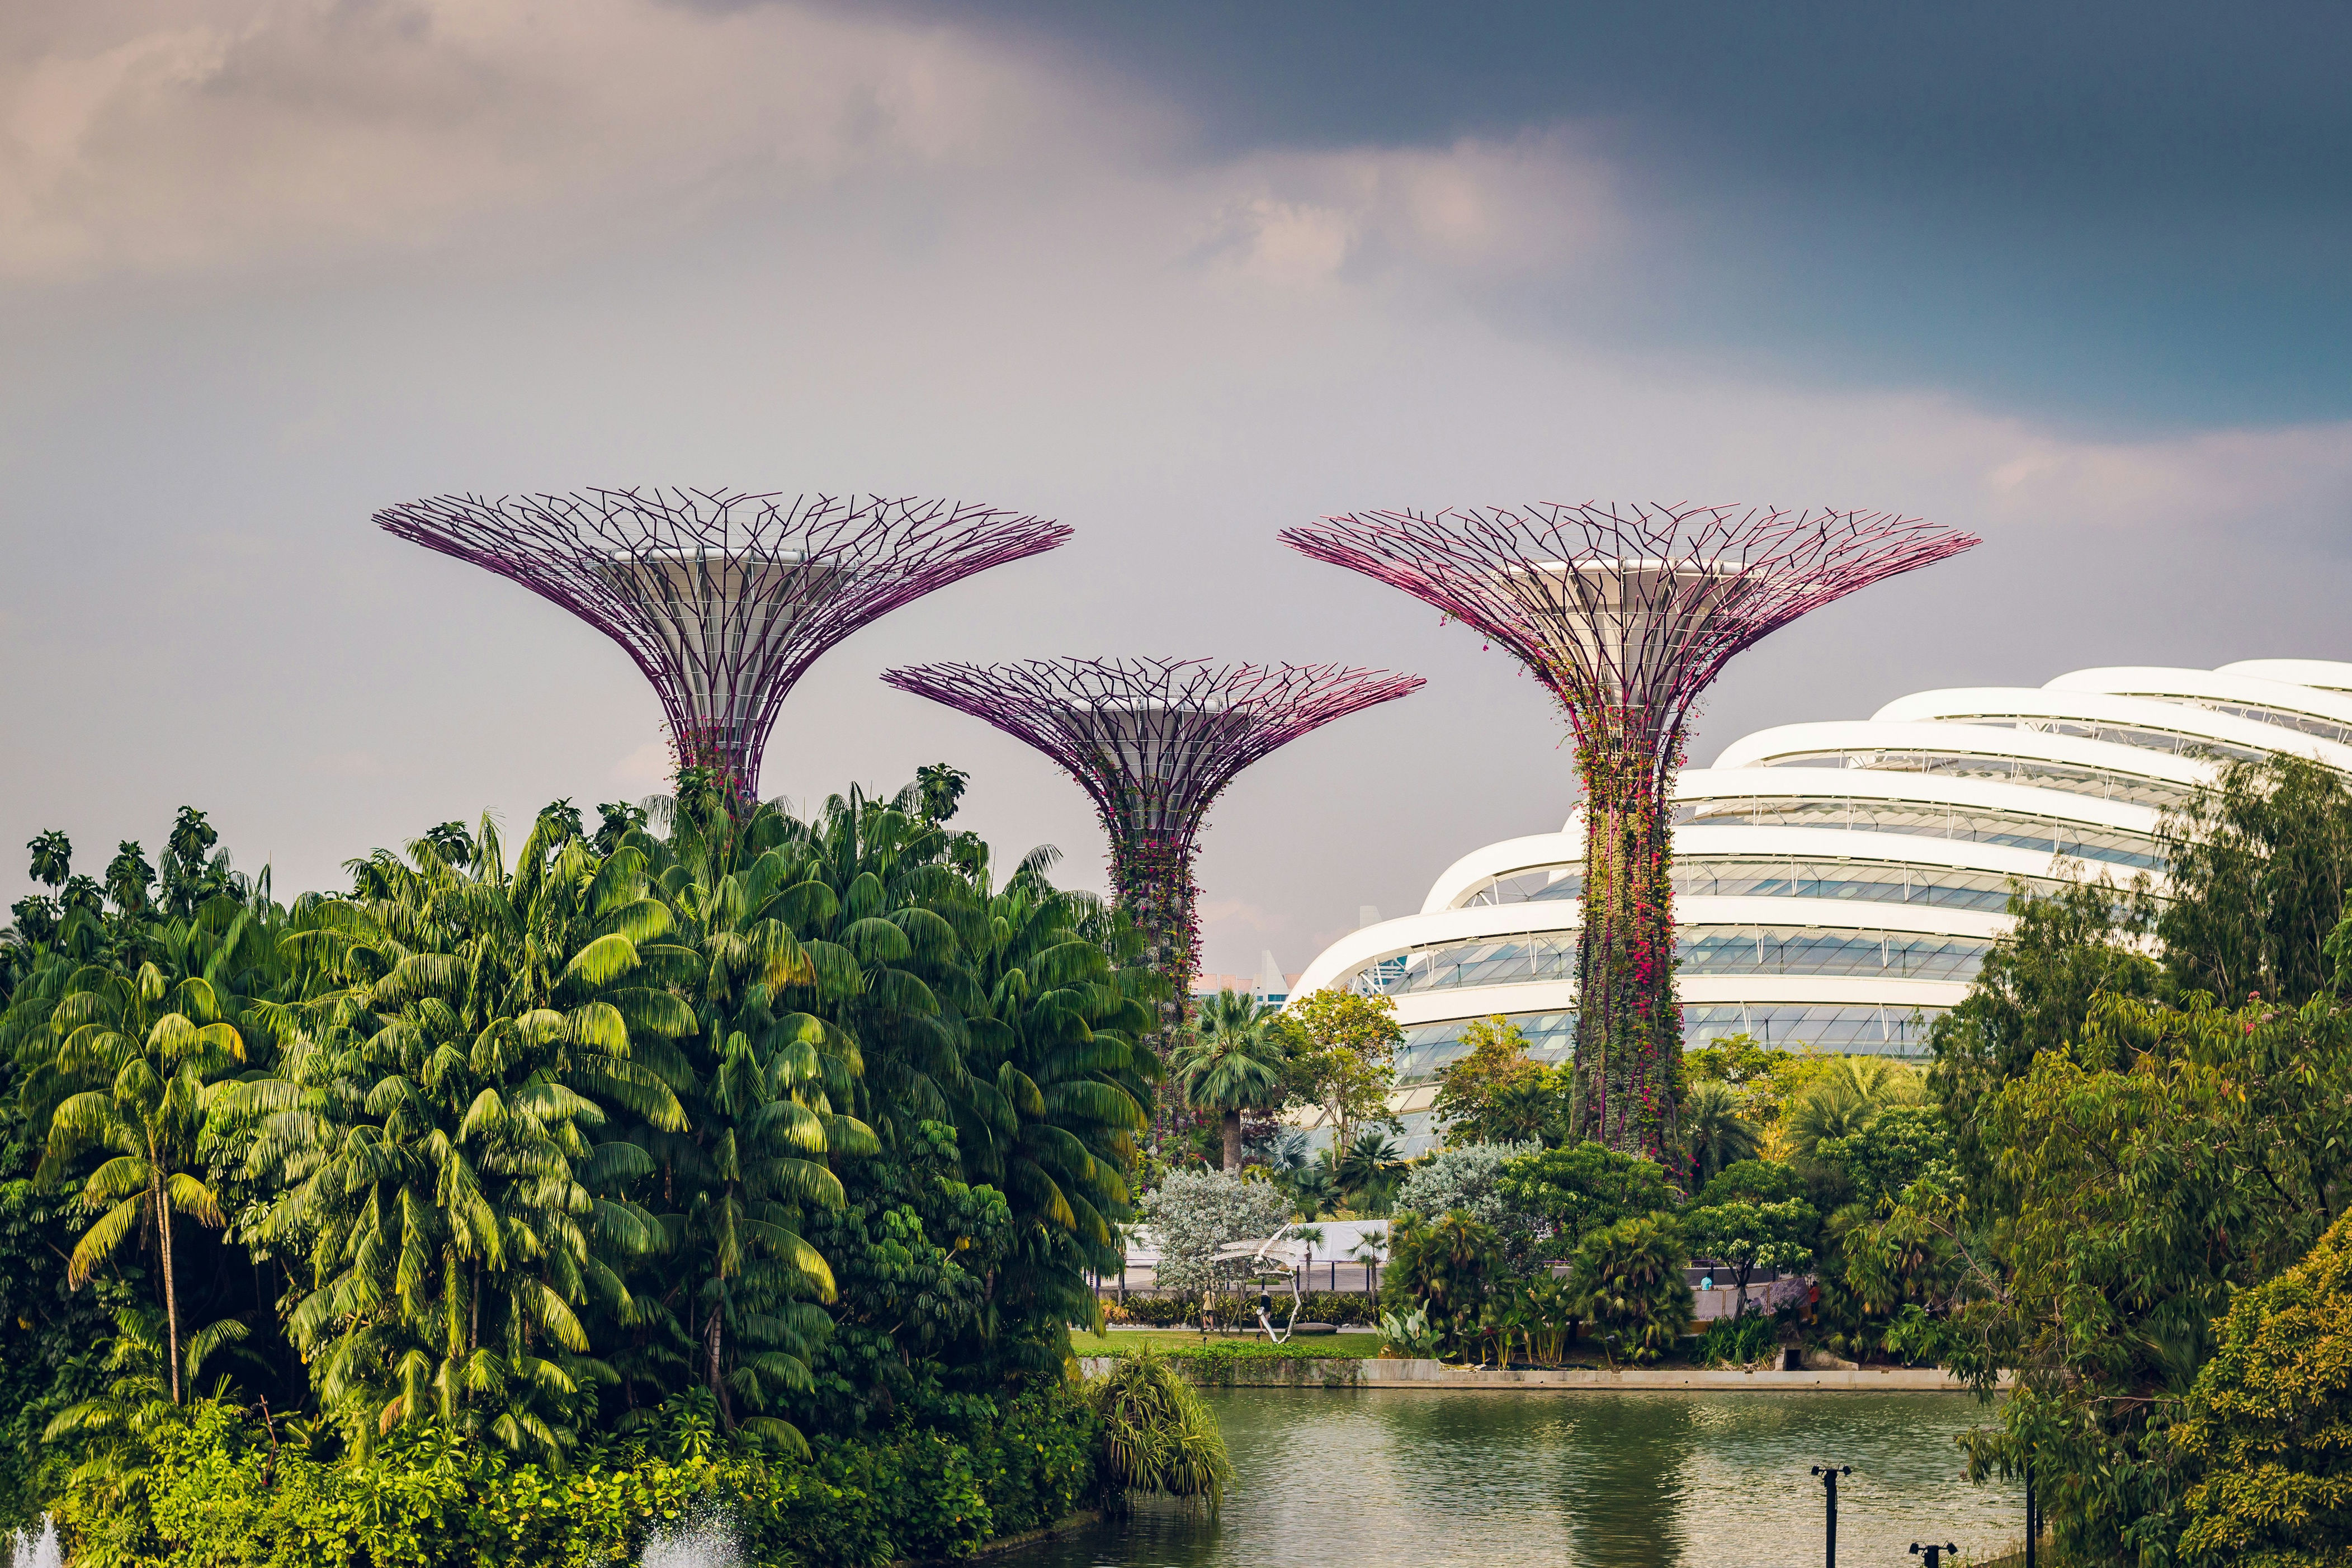 <p><a href="https://www.cntraveler.com/destinations/singapore?mbid=synd_msn_rss&utm_source=msn&utm_medium=syndication">Singapore</a> is a city and a nation rolled into one on an island nearly the same size of New York City. As the third-most densely populated country in the world, well-designed transportation that can move millions is essential for this small nation.</p> <p>Singapore’s MRT (Mass Rapid Transit) currently has 6 lines with 140 stations and is scheduled to double in size by 2040. In a country of just over 5.5 million people, Singapore’s MRT carries an outstanding 3 million every day.</p> <p>The MRT’s trains are fast and predictable, running every 5 to 7 minutes most of the day and every 2 to 3 minutes during the morning rush. The MRT’s reach is complemented by the LRT, a light rail system with 2 lines and another 40 stops.</p> <p>With station signage and announcements in Singapore’s four official languages—English, Chinese, Malay, and Tamil—the MRT makes it remarkably easy to navigate without a car or a care. They have also installed protected walkways on every quarter-mile leading to every MRT station, making it easier to walk to transit, monsoon or shine.</p> <p><strong>How to experience it:</strong> Don’t miss Singapore’s breathtaking <a href="https://www.cntraveler.com/activities/singapore/gardens-by-the-bay?mbid=synd_msn_rss&utm_source=msn&utm_medium=syndication">Garden by the Bay</a> located at the MRT station with the same name on the Thomson–East Coast Line.</p><p>Sign up to receive the latest news, expert tips, and inspiration on all things travel</p><a href="https://www.cntraveler.com/newsletter/the-daily?sourceCode=msnsend">Inspire Me</a>